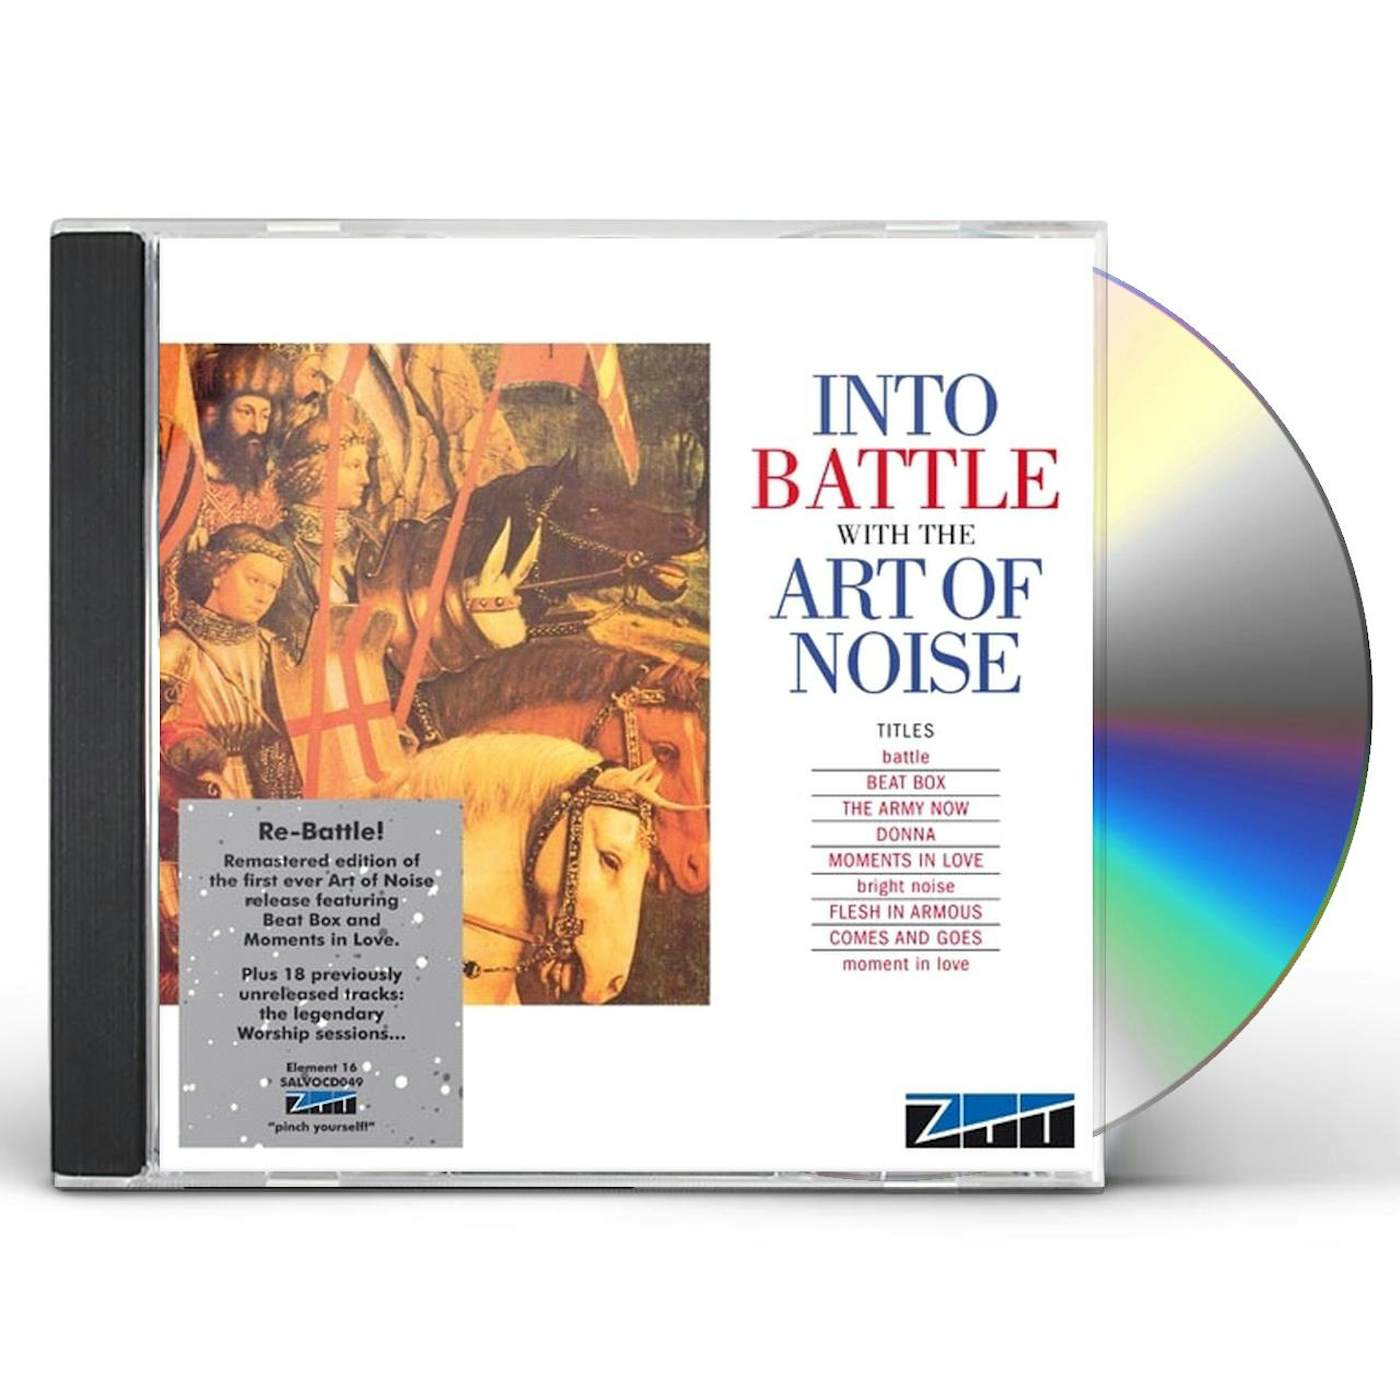 INTO BATTLE WITH THE ART OF NOISE CD